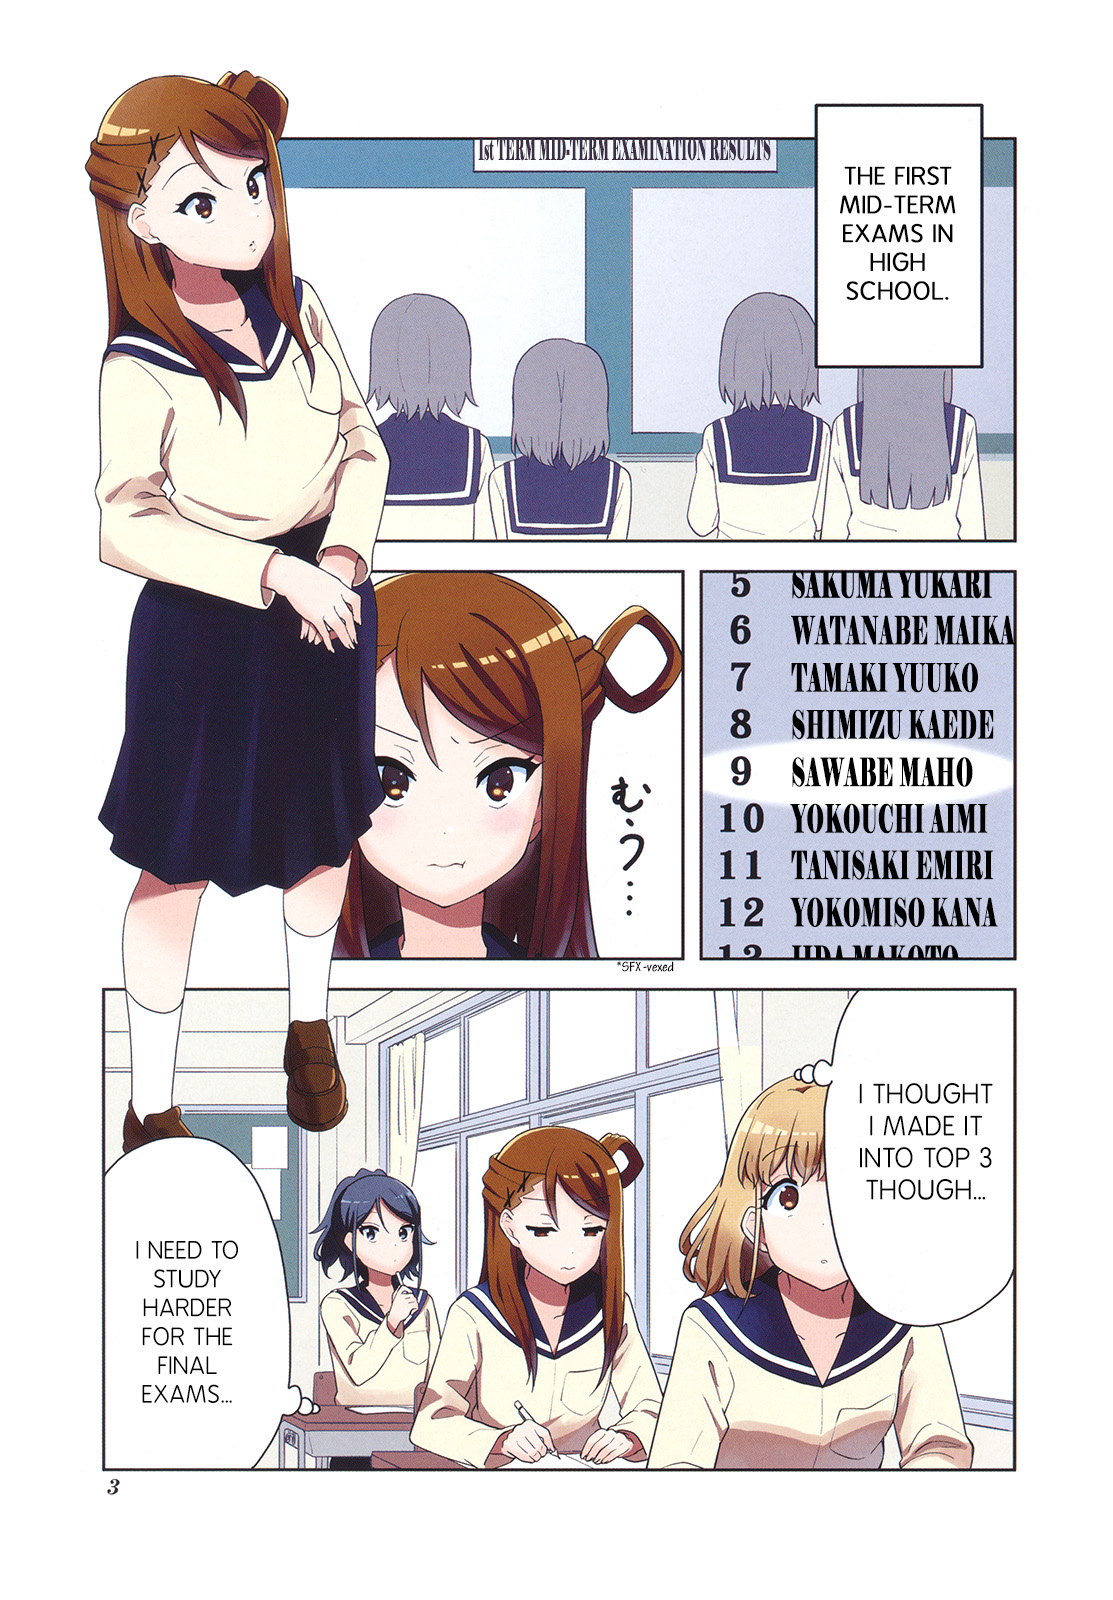 K-On! Shuffle - Page 1